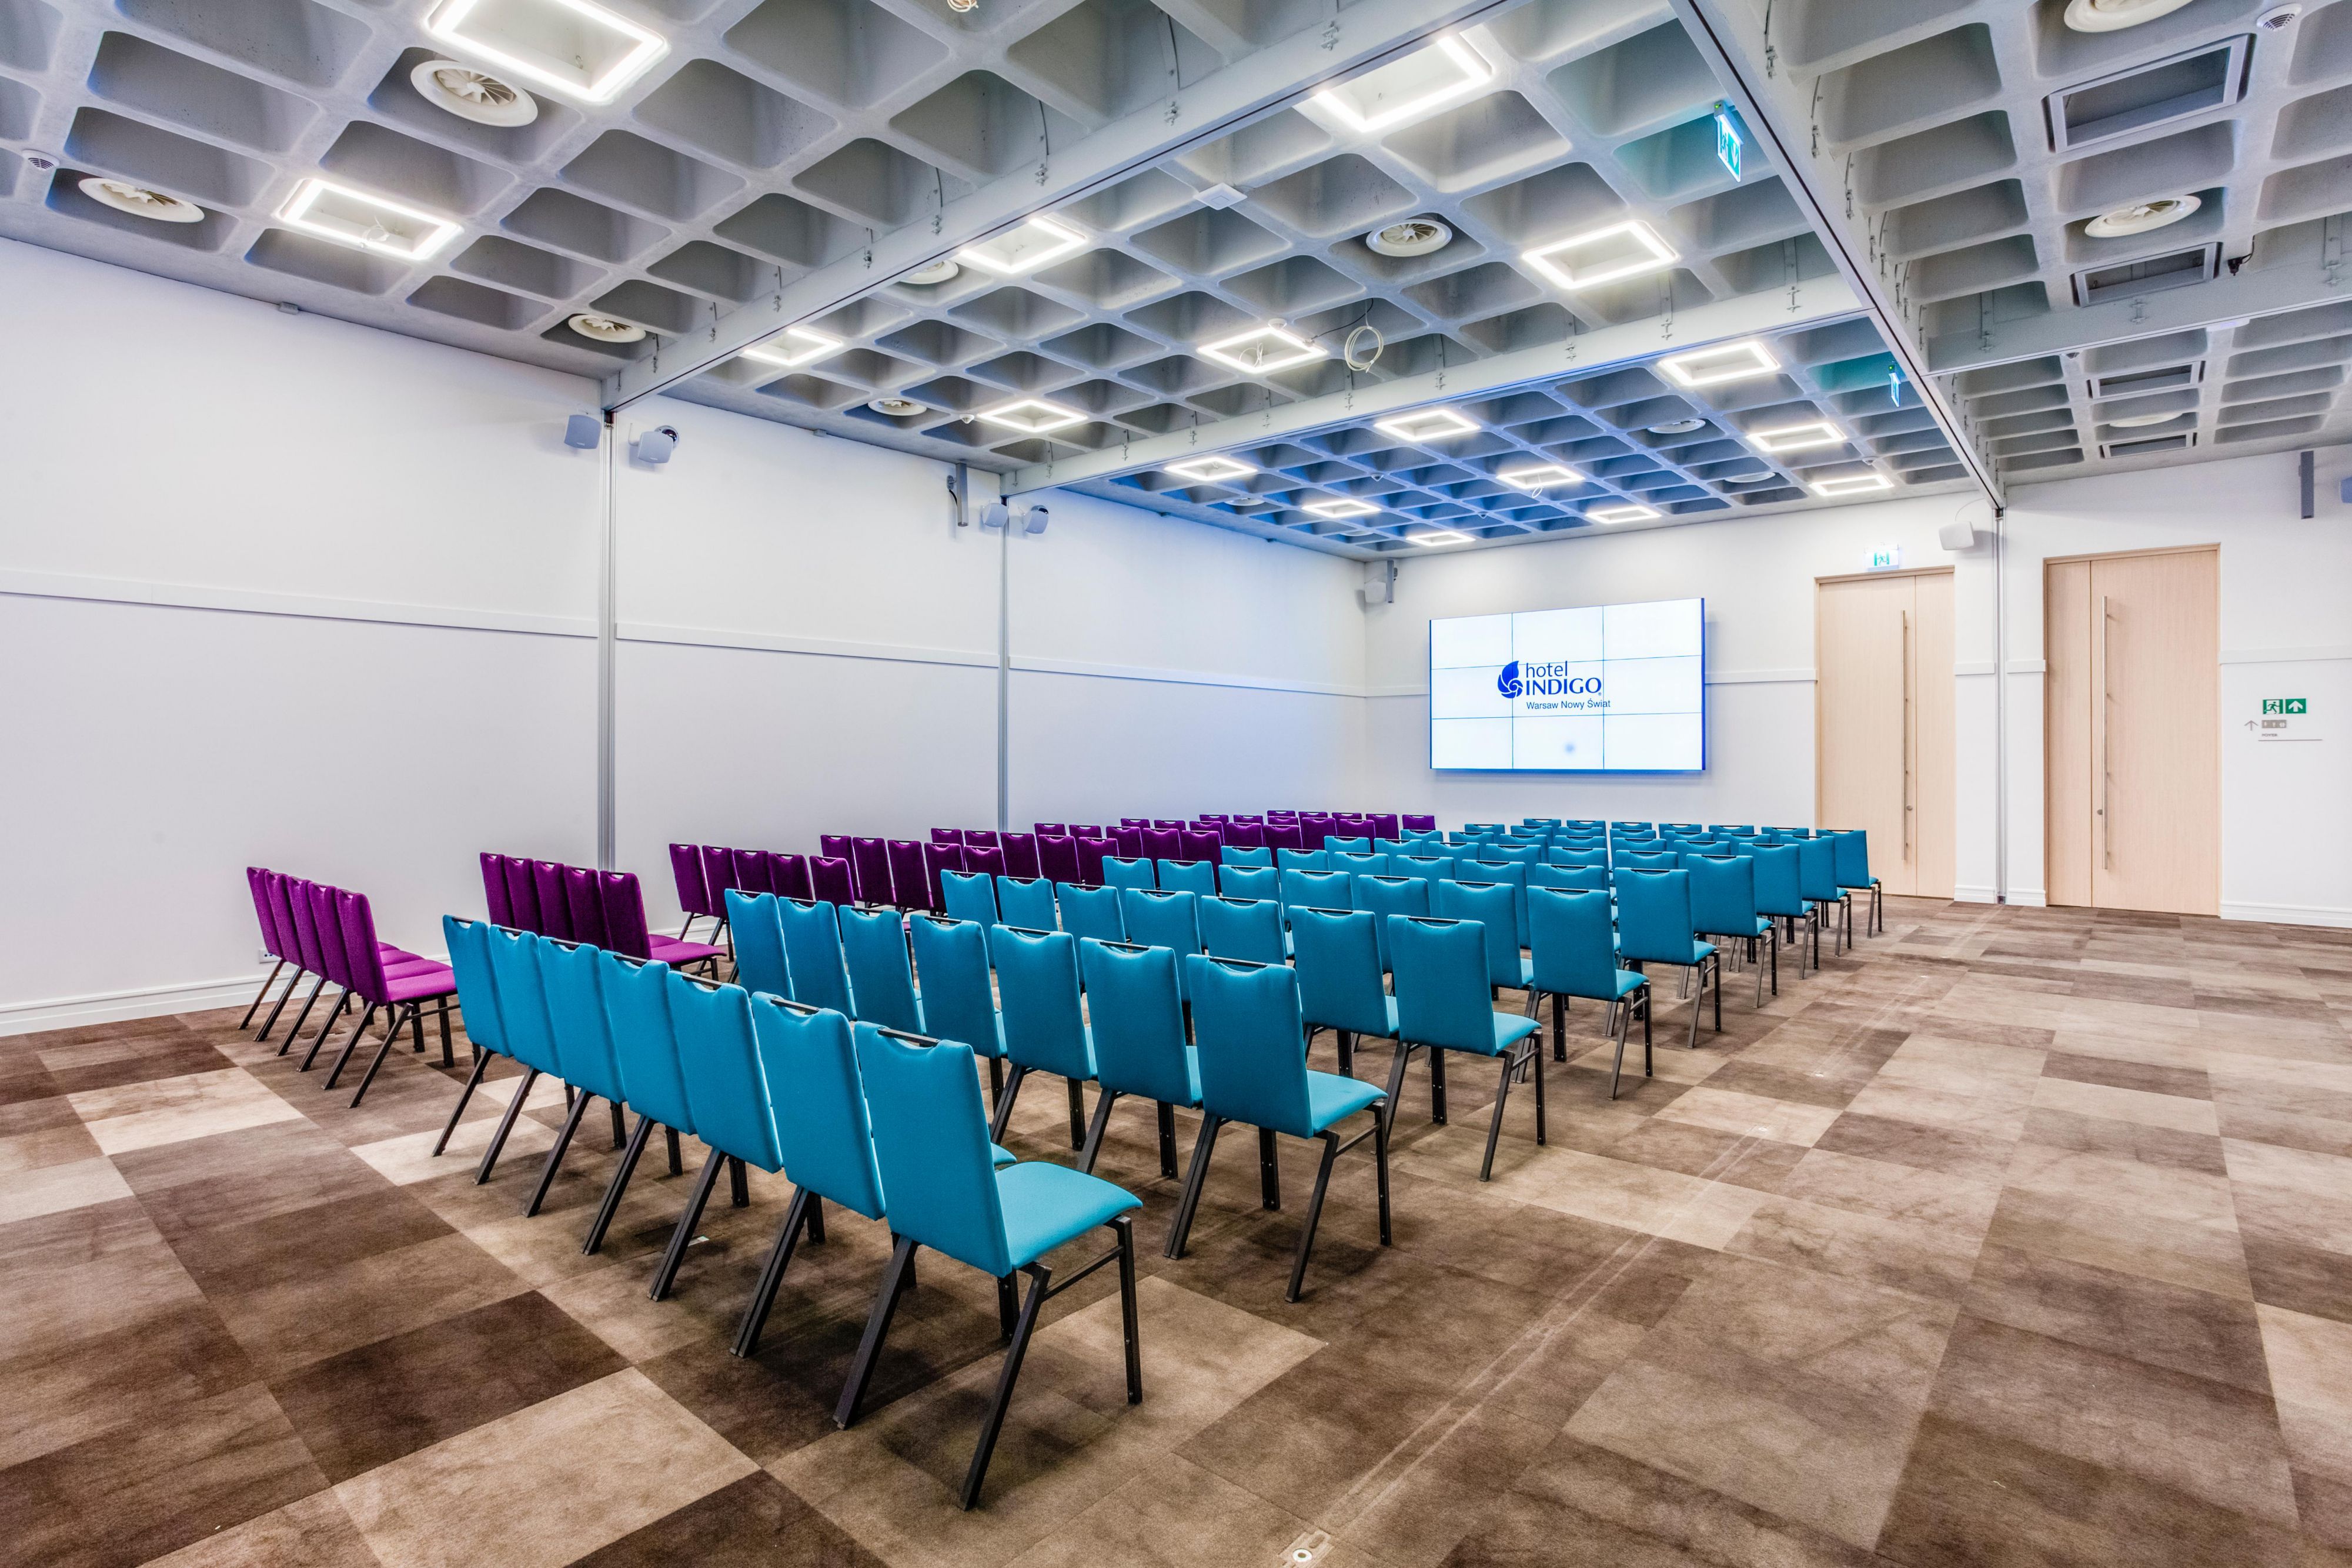 WHY TO CHOOSE US? 
Central location;
Convenient access by car and public transport;
Privacy of conference area;
Open space without pillars, with good lighting;
Elegant and spacious Foyer;
Excellent dining experience.